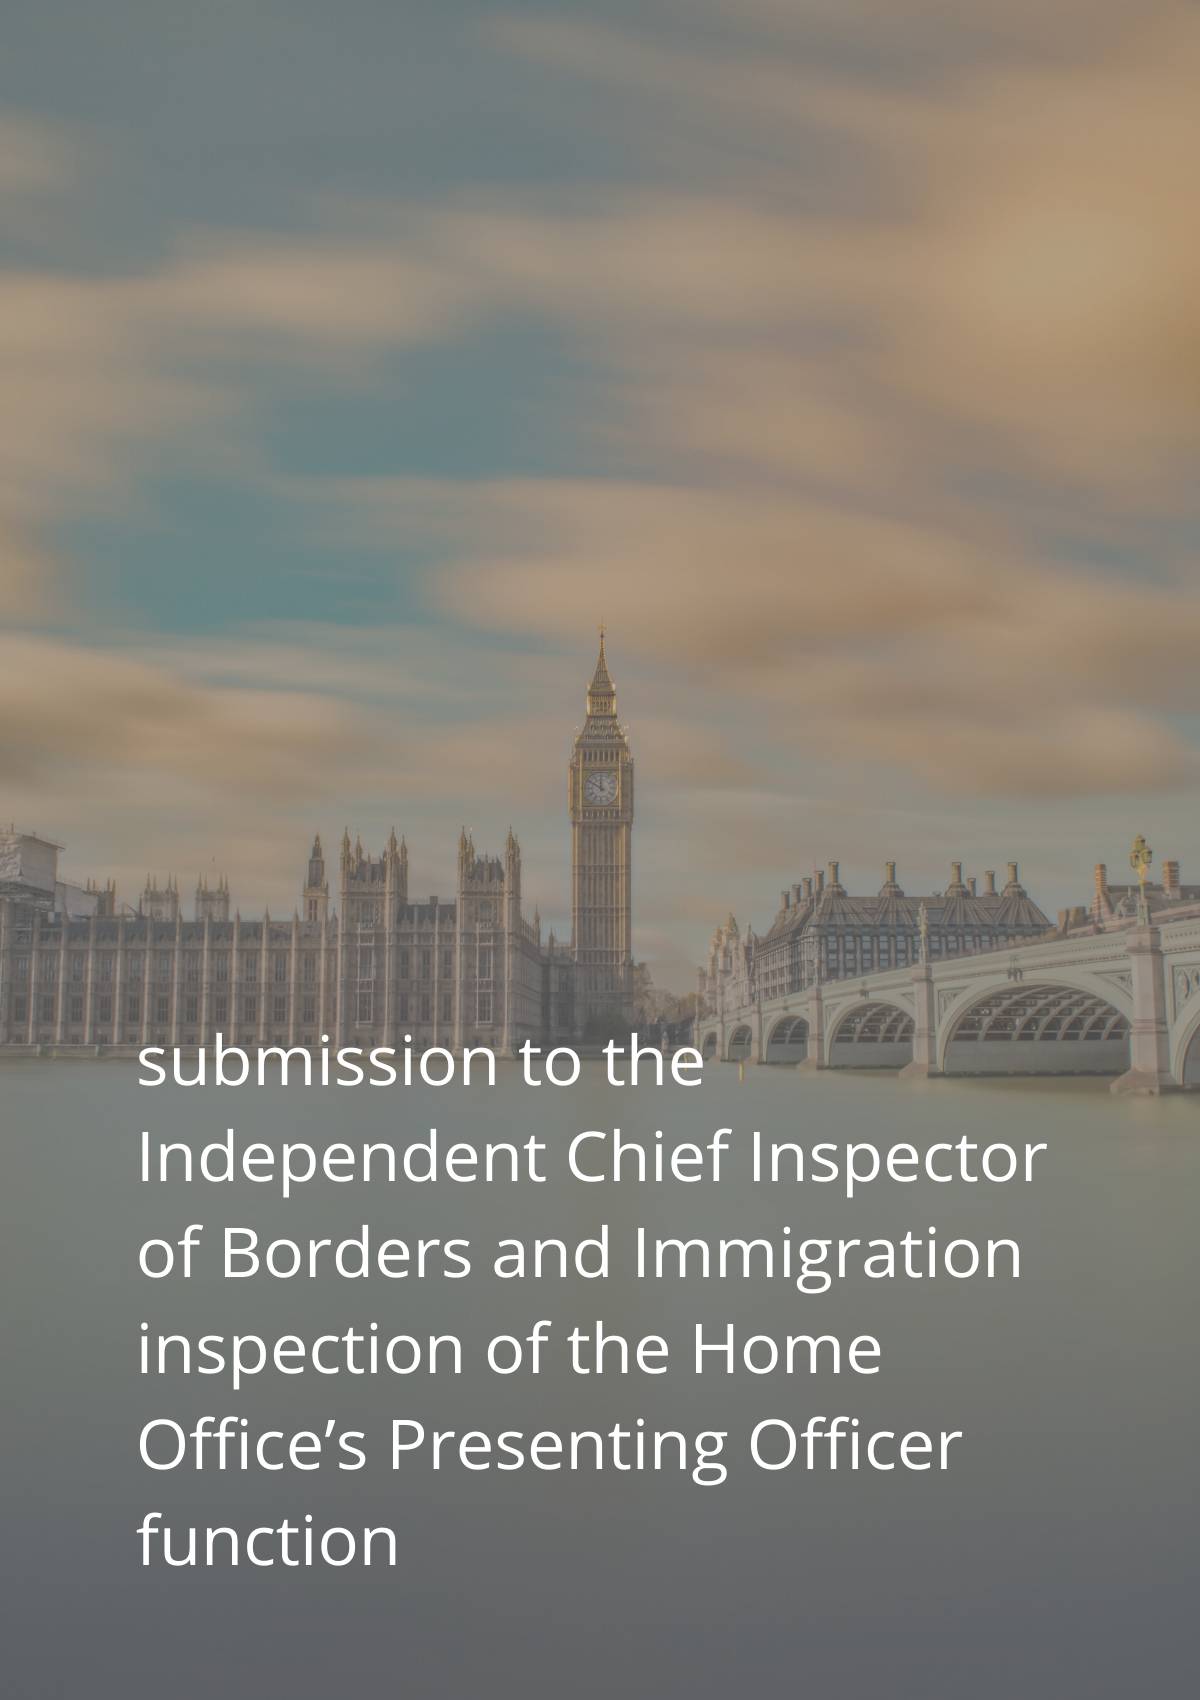 Submission to the independent chief inspector of borders and immigration presenting the home officer function.